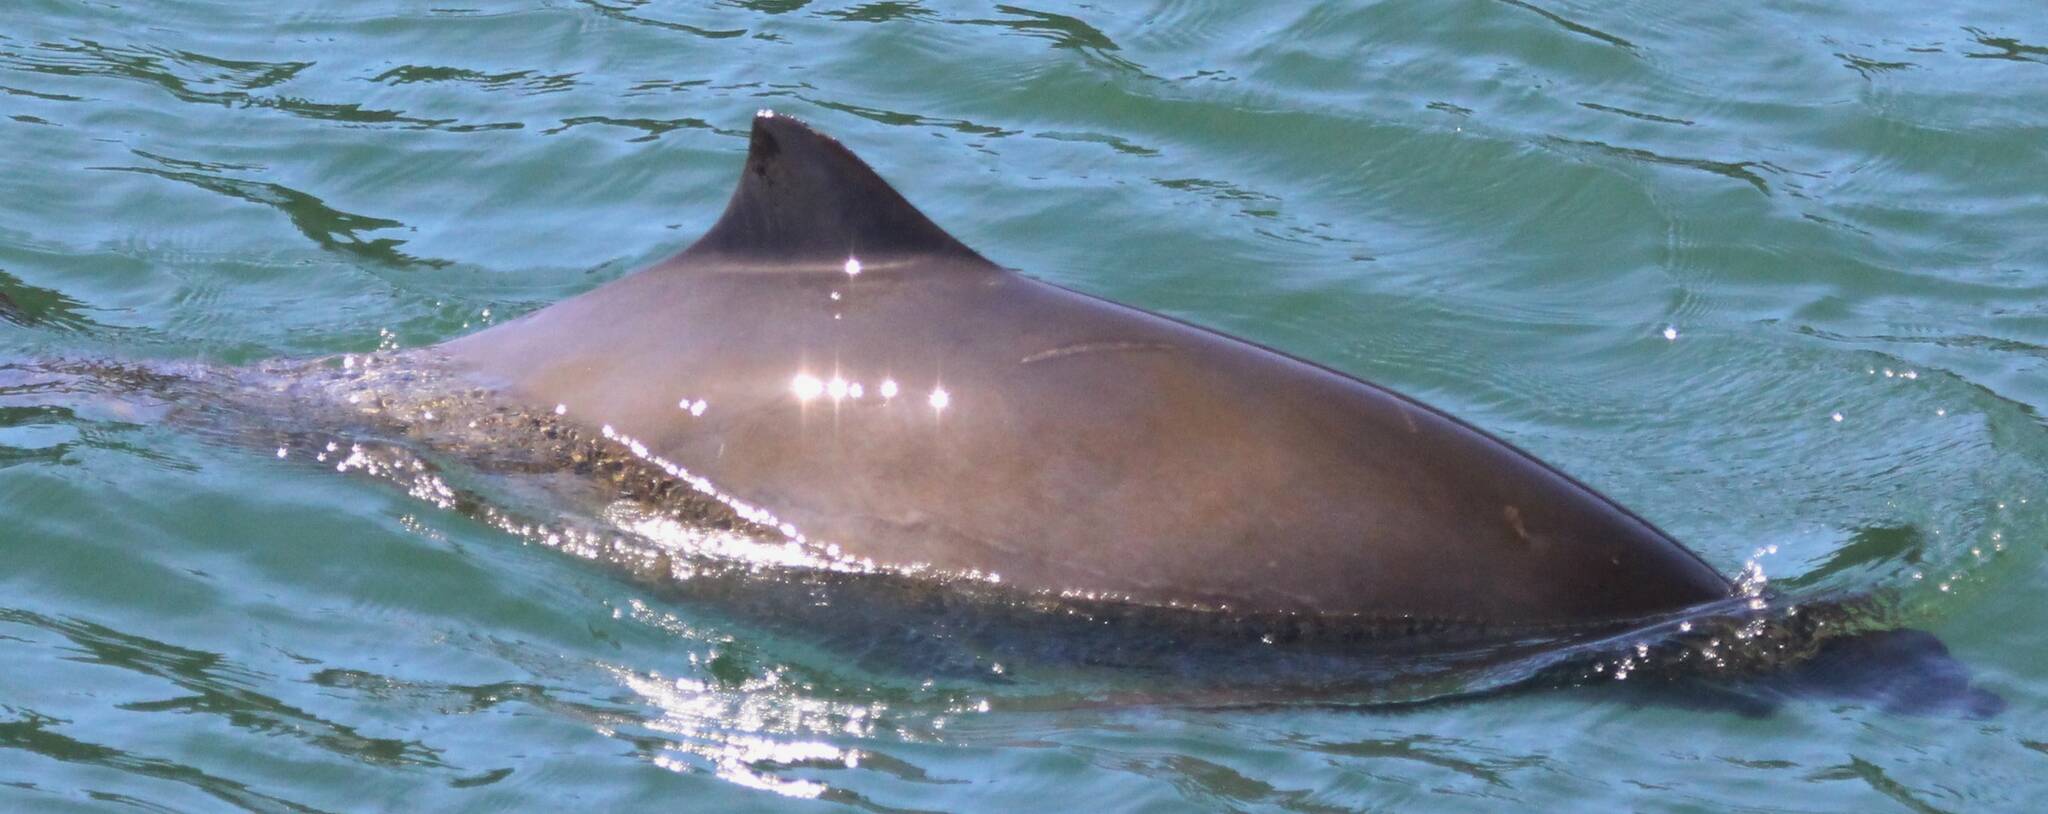 Photo provided
Pointer is a harbor porpoise that has been identified by Pacific Mammal Research.